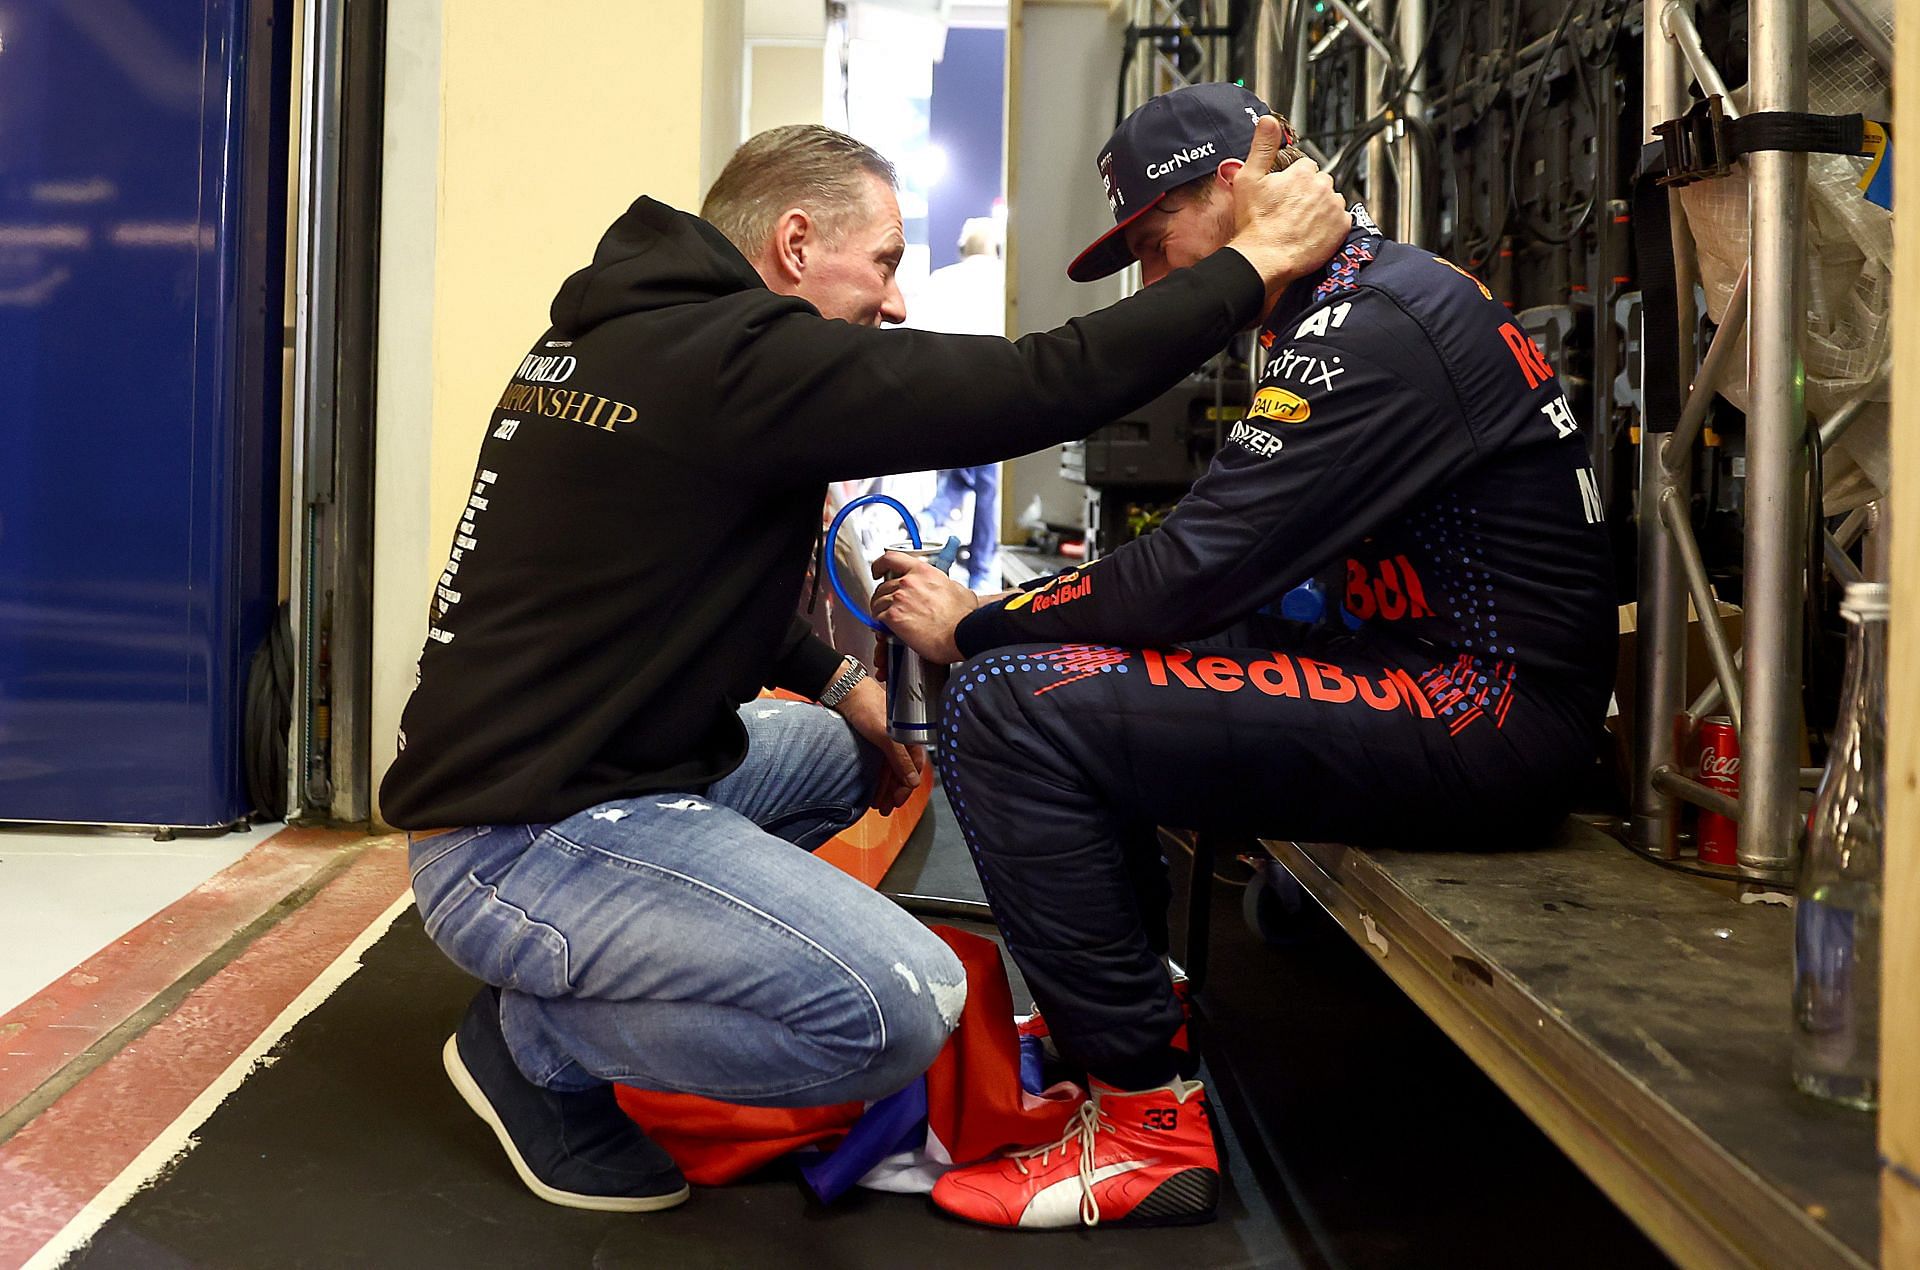 "A real family effort" Max Verstappen on the sacrifices made by his